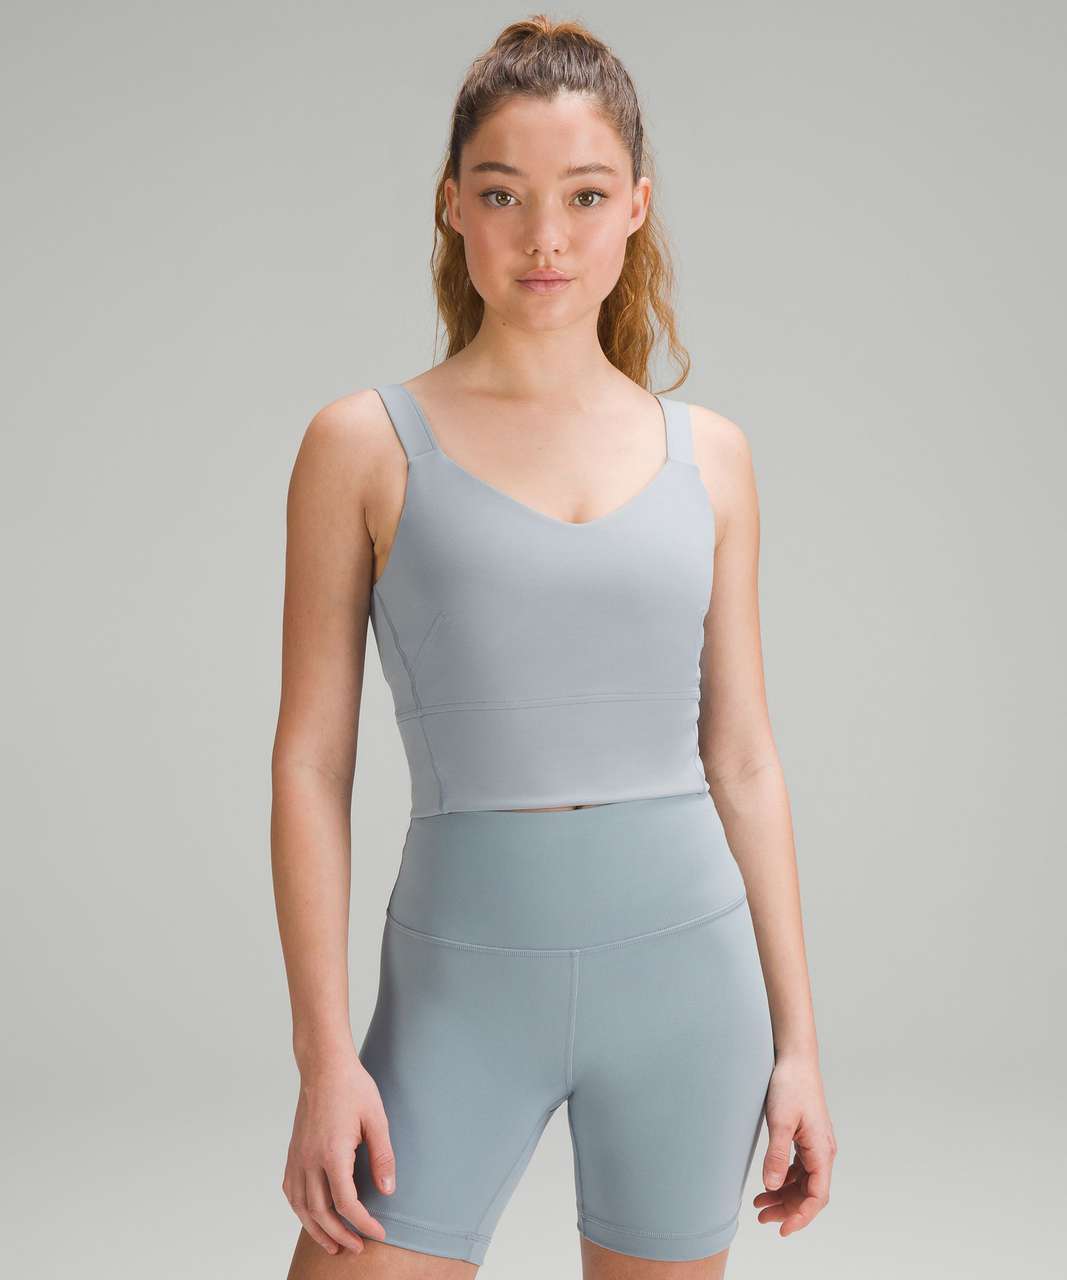 Size 12 girl. Wunder Train and Align tank both in 12. Size 16/18 straight  size with a 38/40D. Meh : r/lululemon